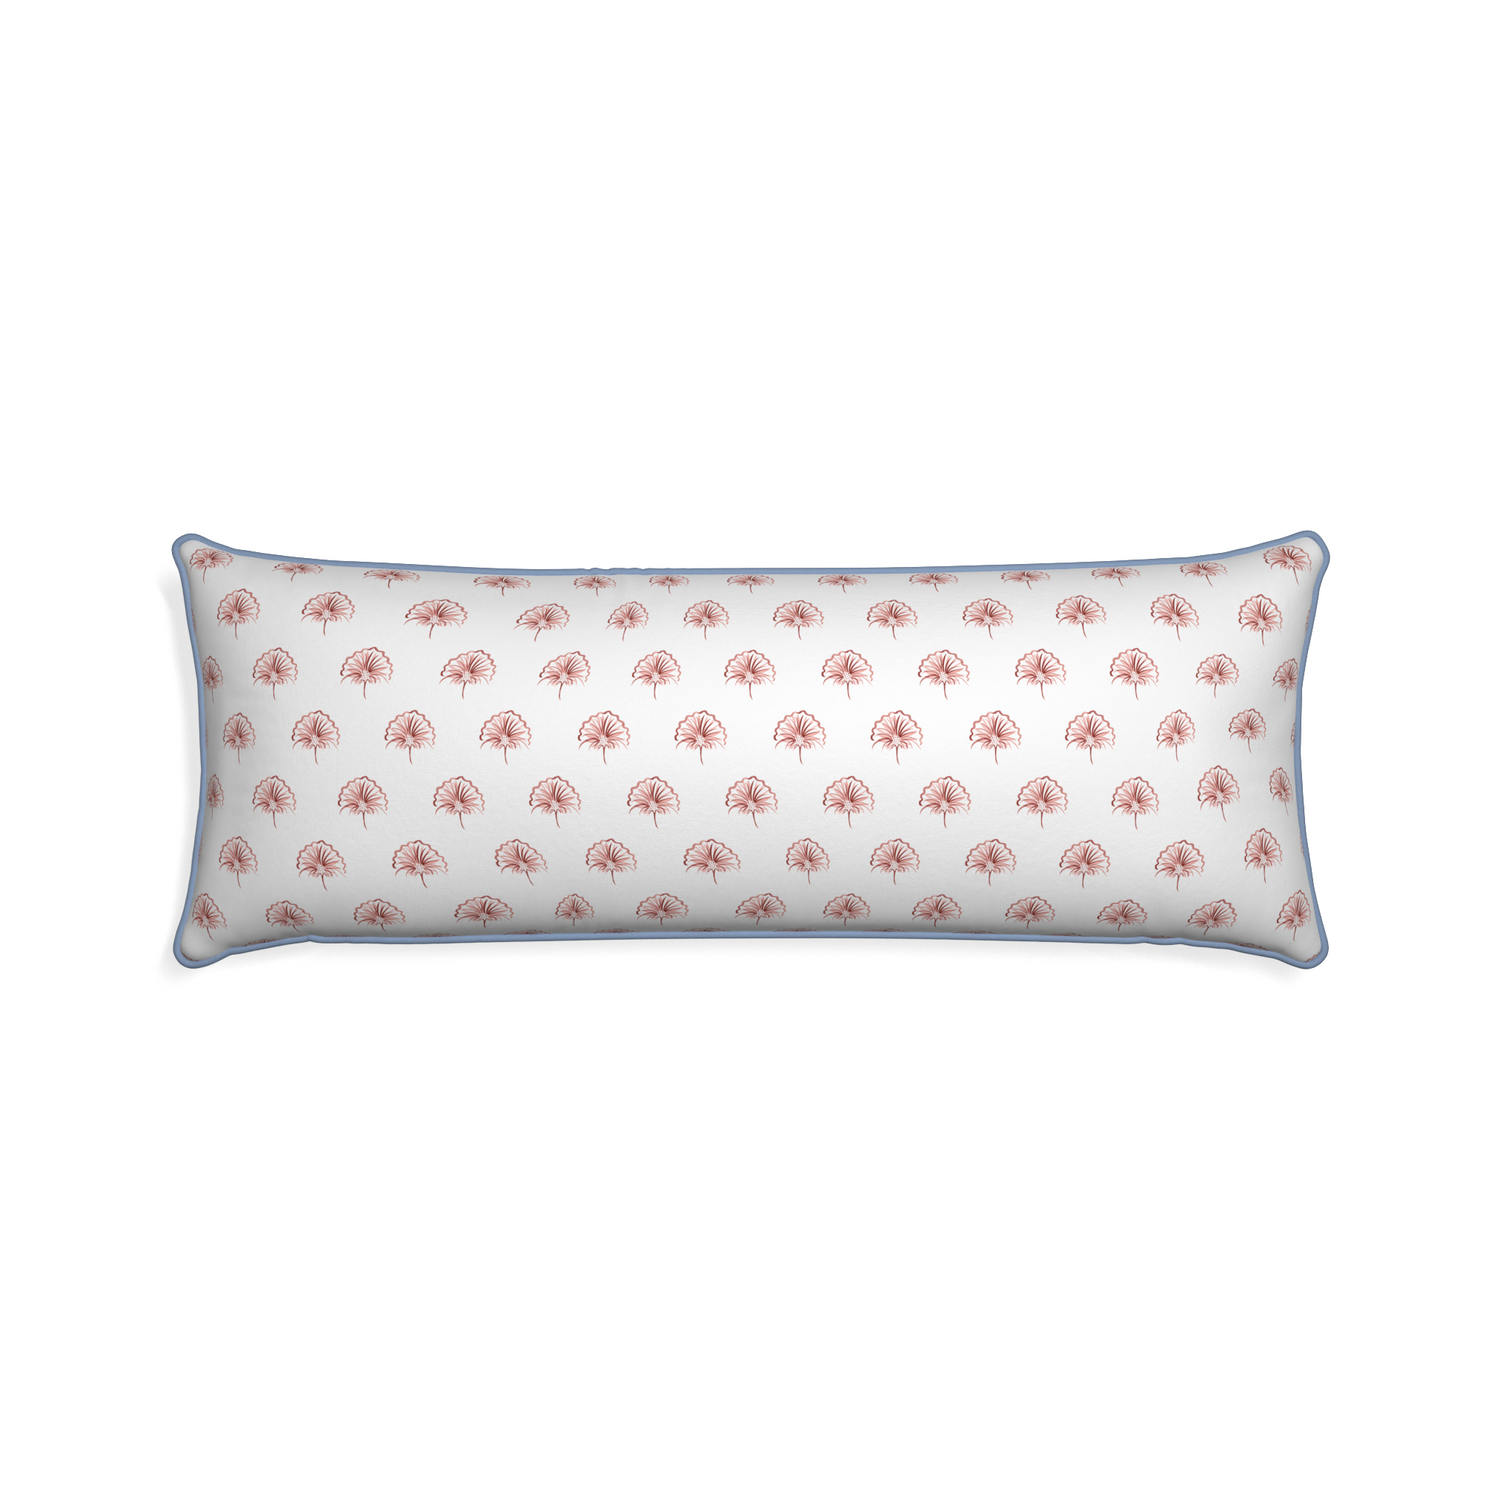 Xl-lumbar penelope rose custom floral pinkpillow with sky piping on white background